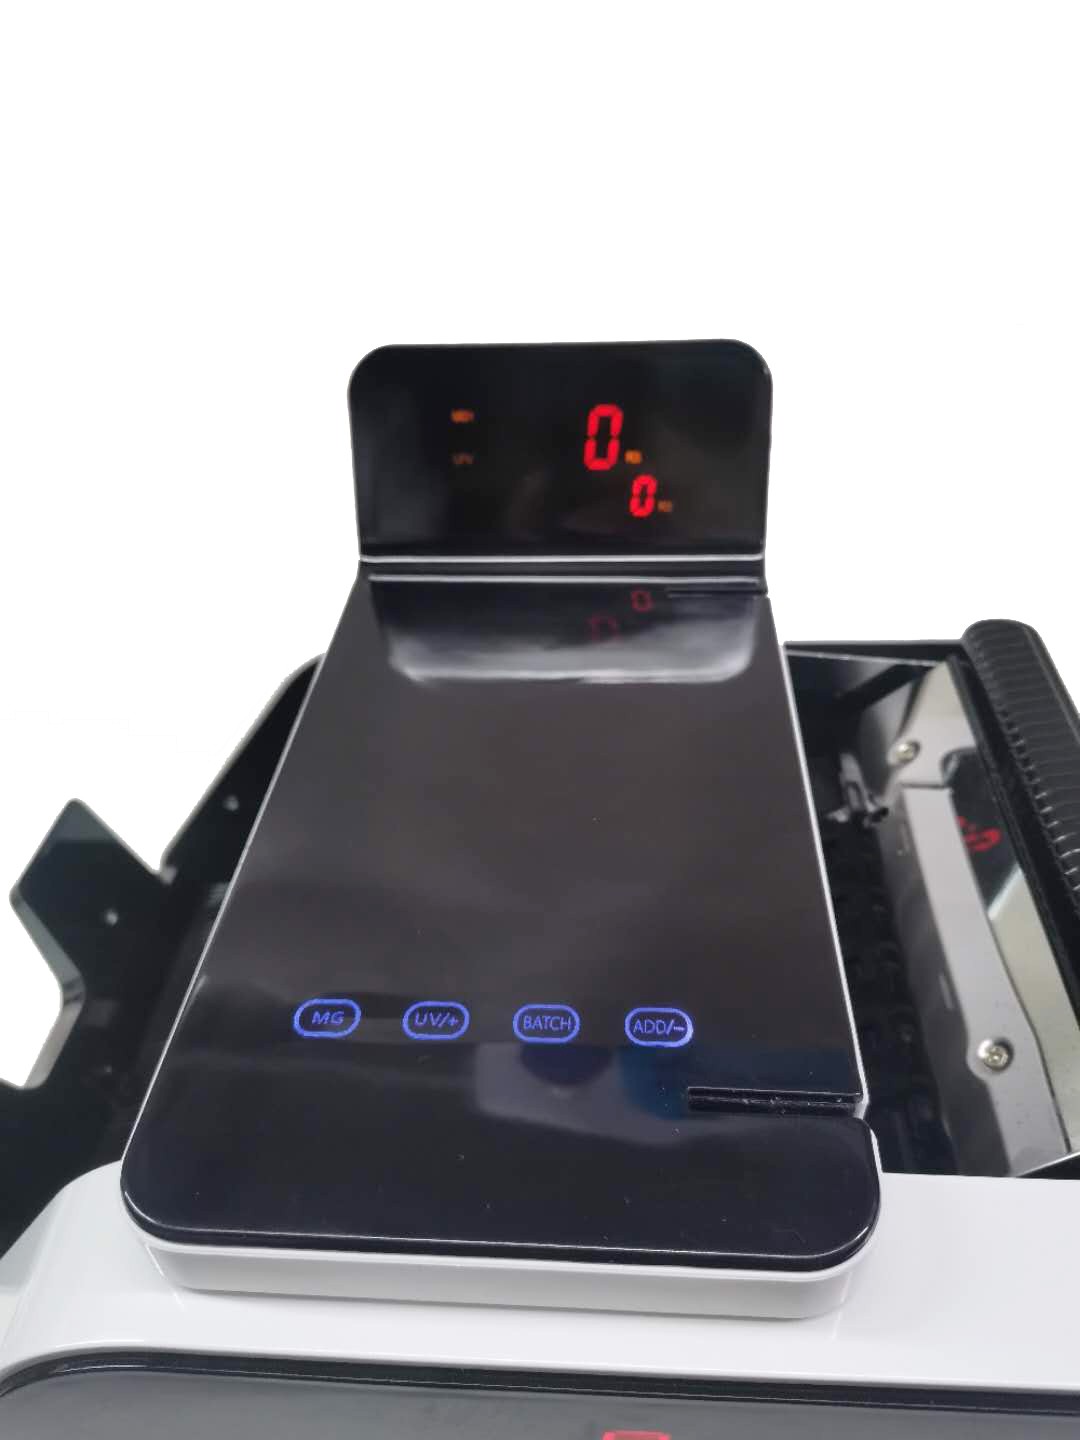 2021 fresh model hot sale  Touch screen  button bill counter machine  Money Counting Machine with UV MG IR checking